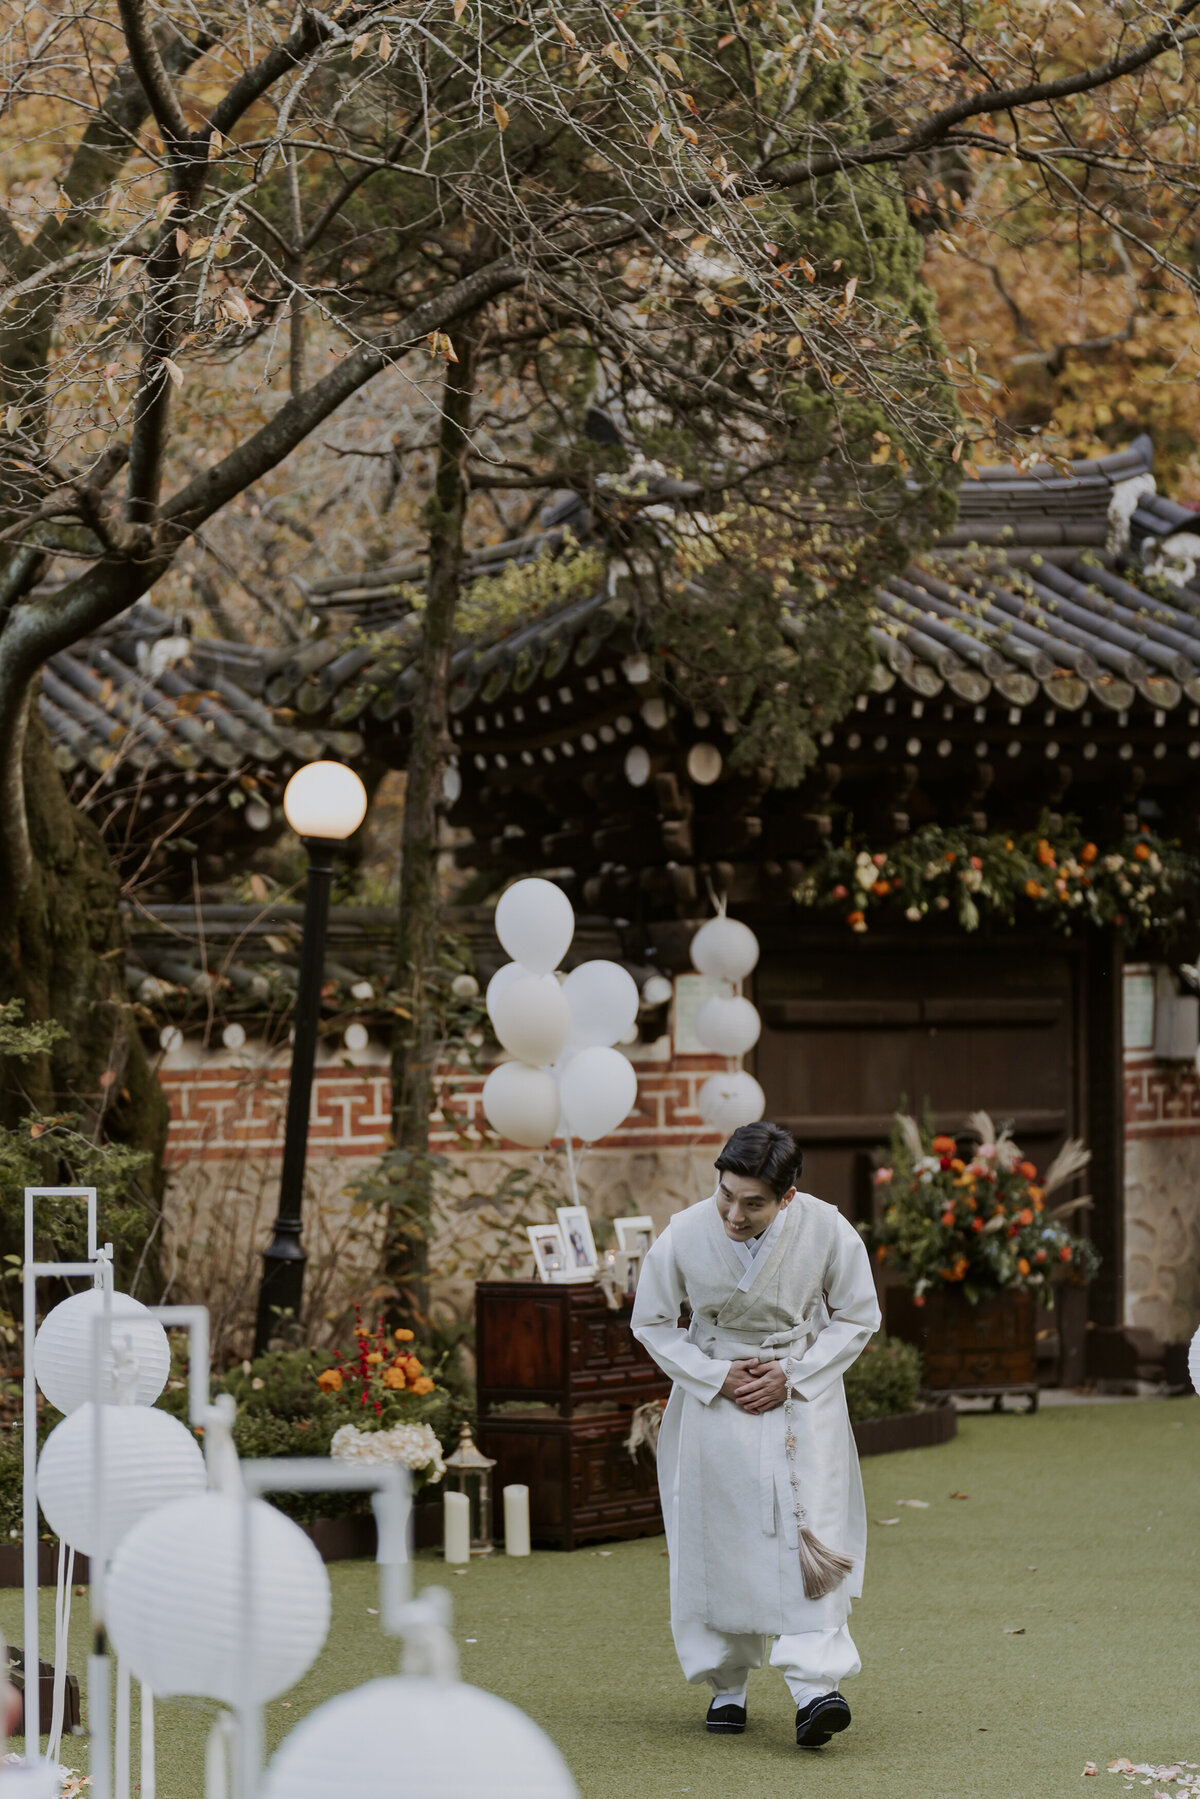 groom in white hanbok bowing to the guests